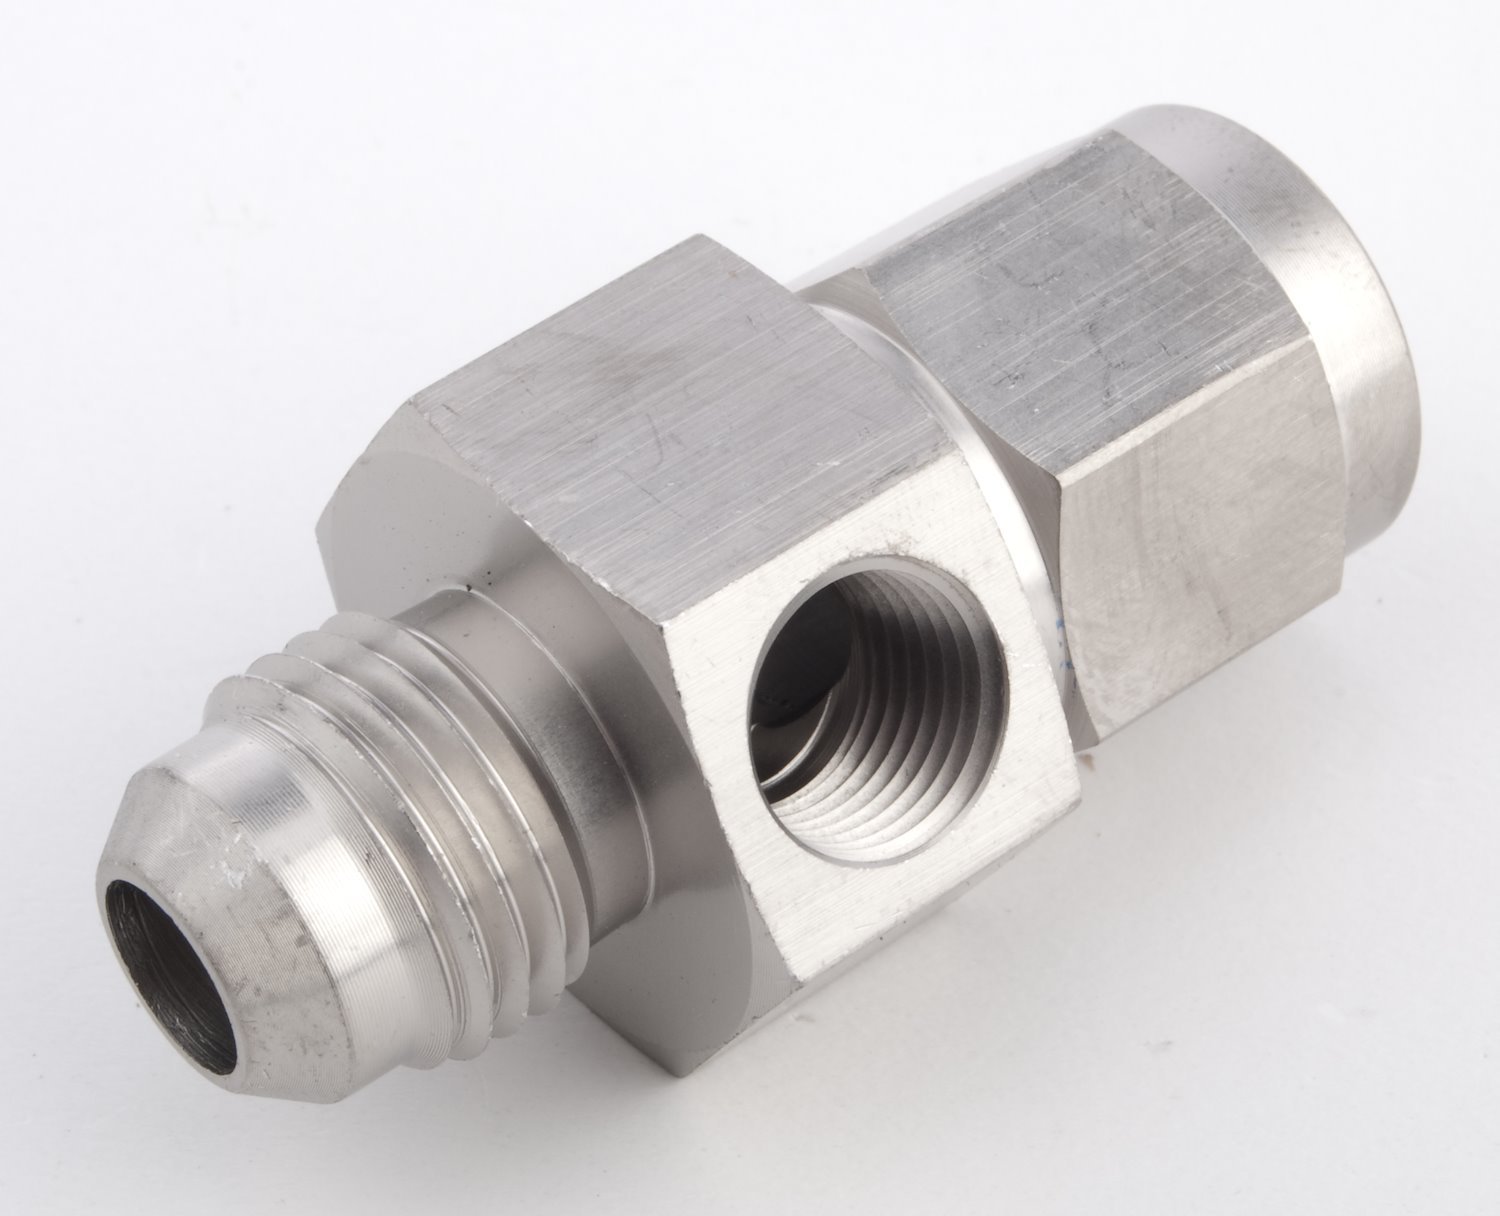 Fuel Pressure Adapter Fitting -6AN Male to -6AN Female